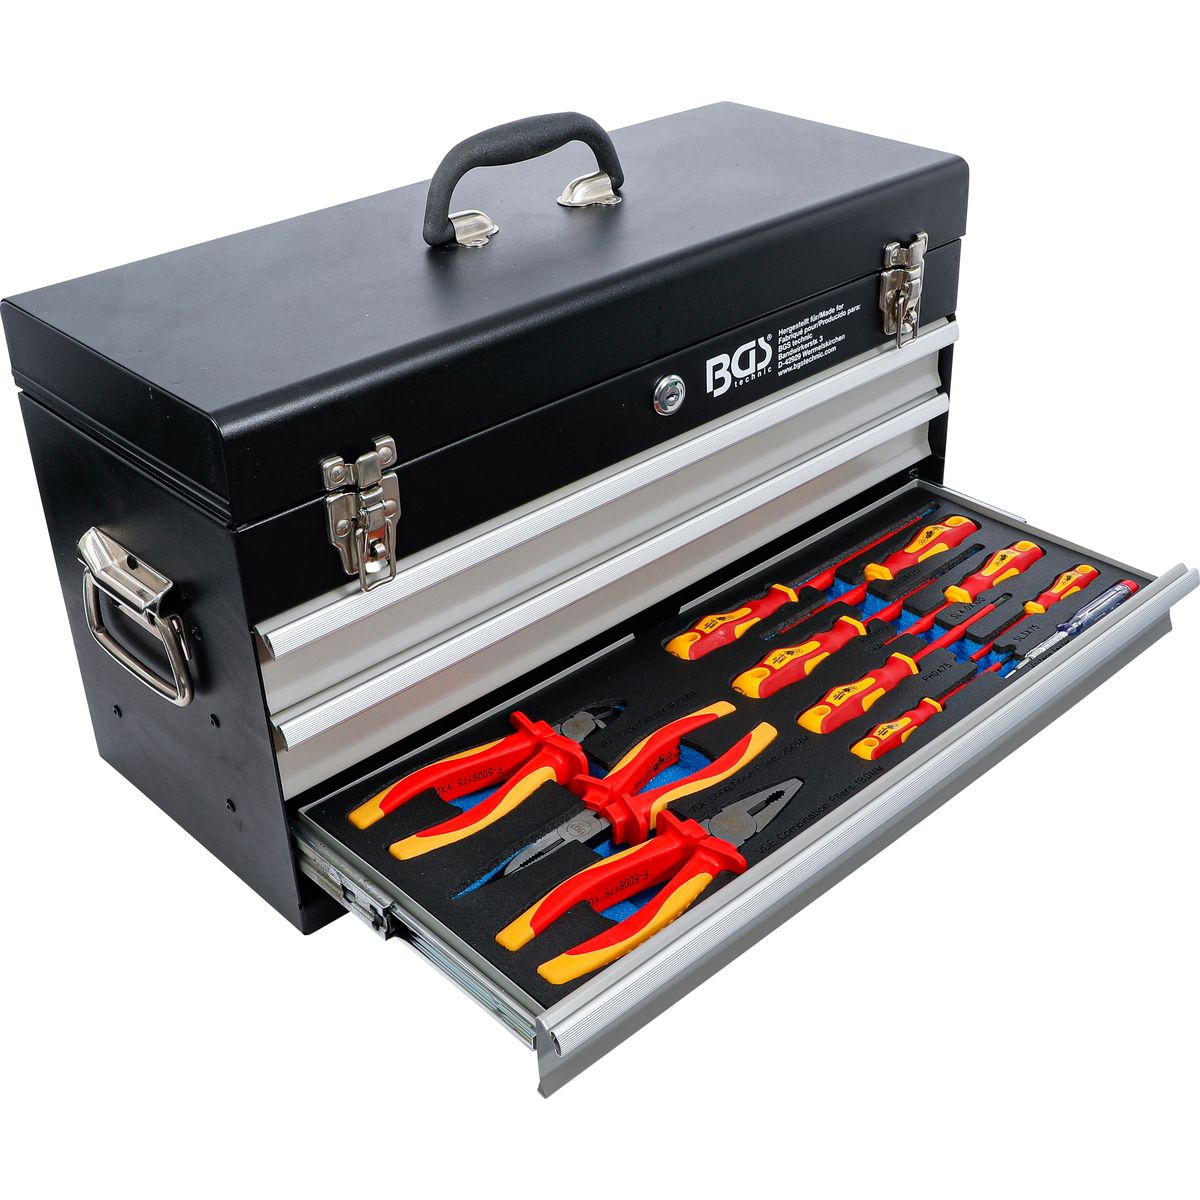 Electricians-Metal Workshop Tool Case | 3 Drawers | with 147 Tools